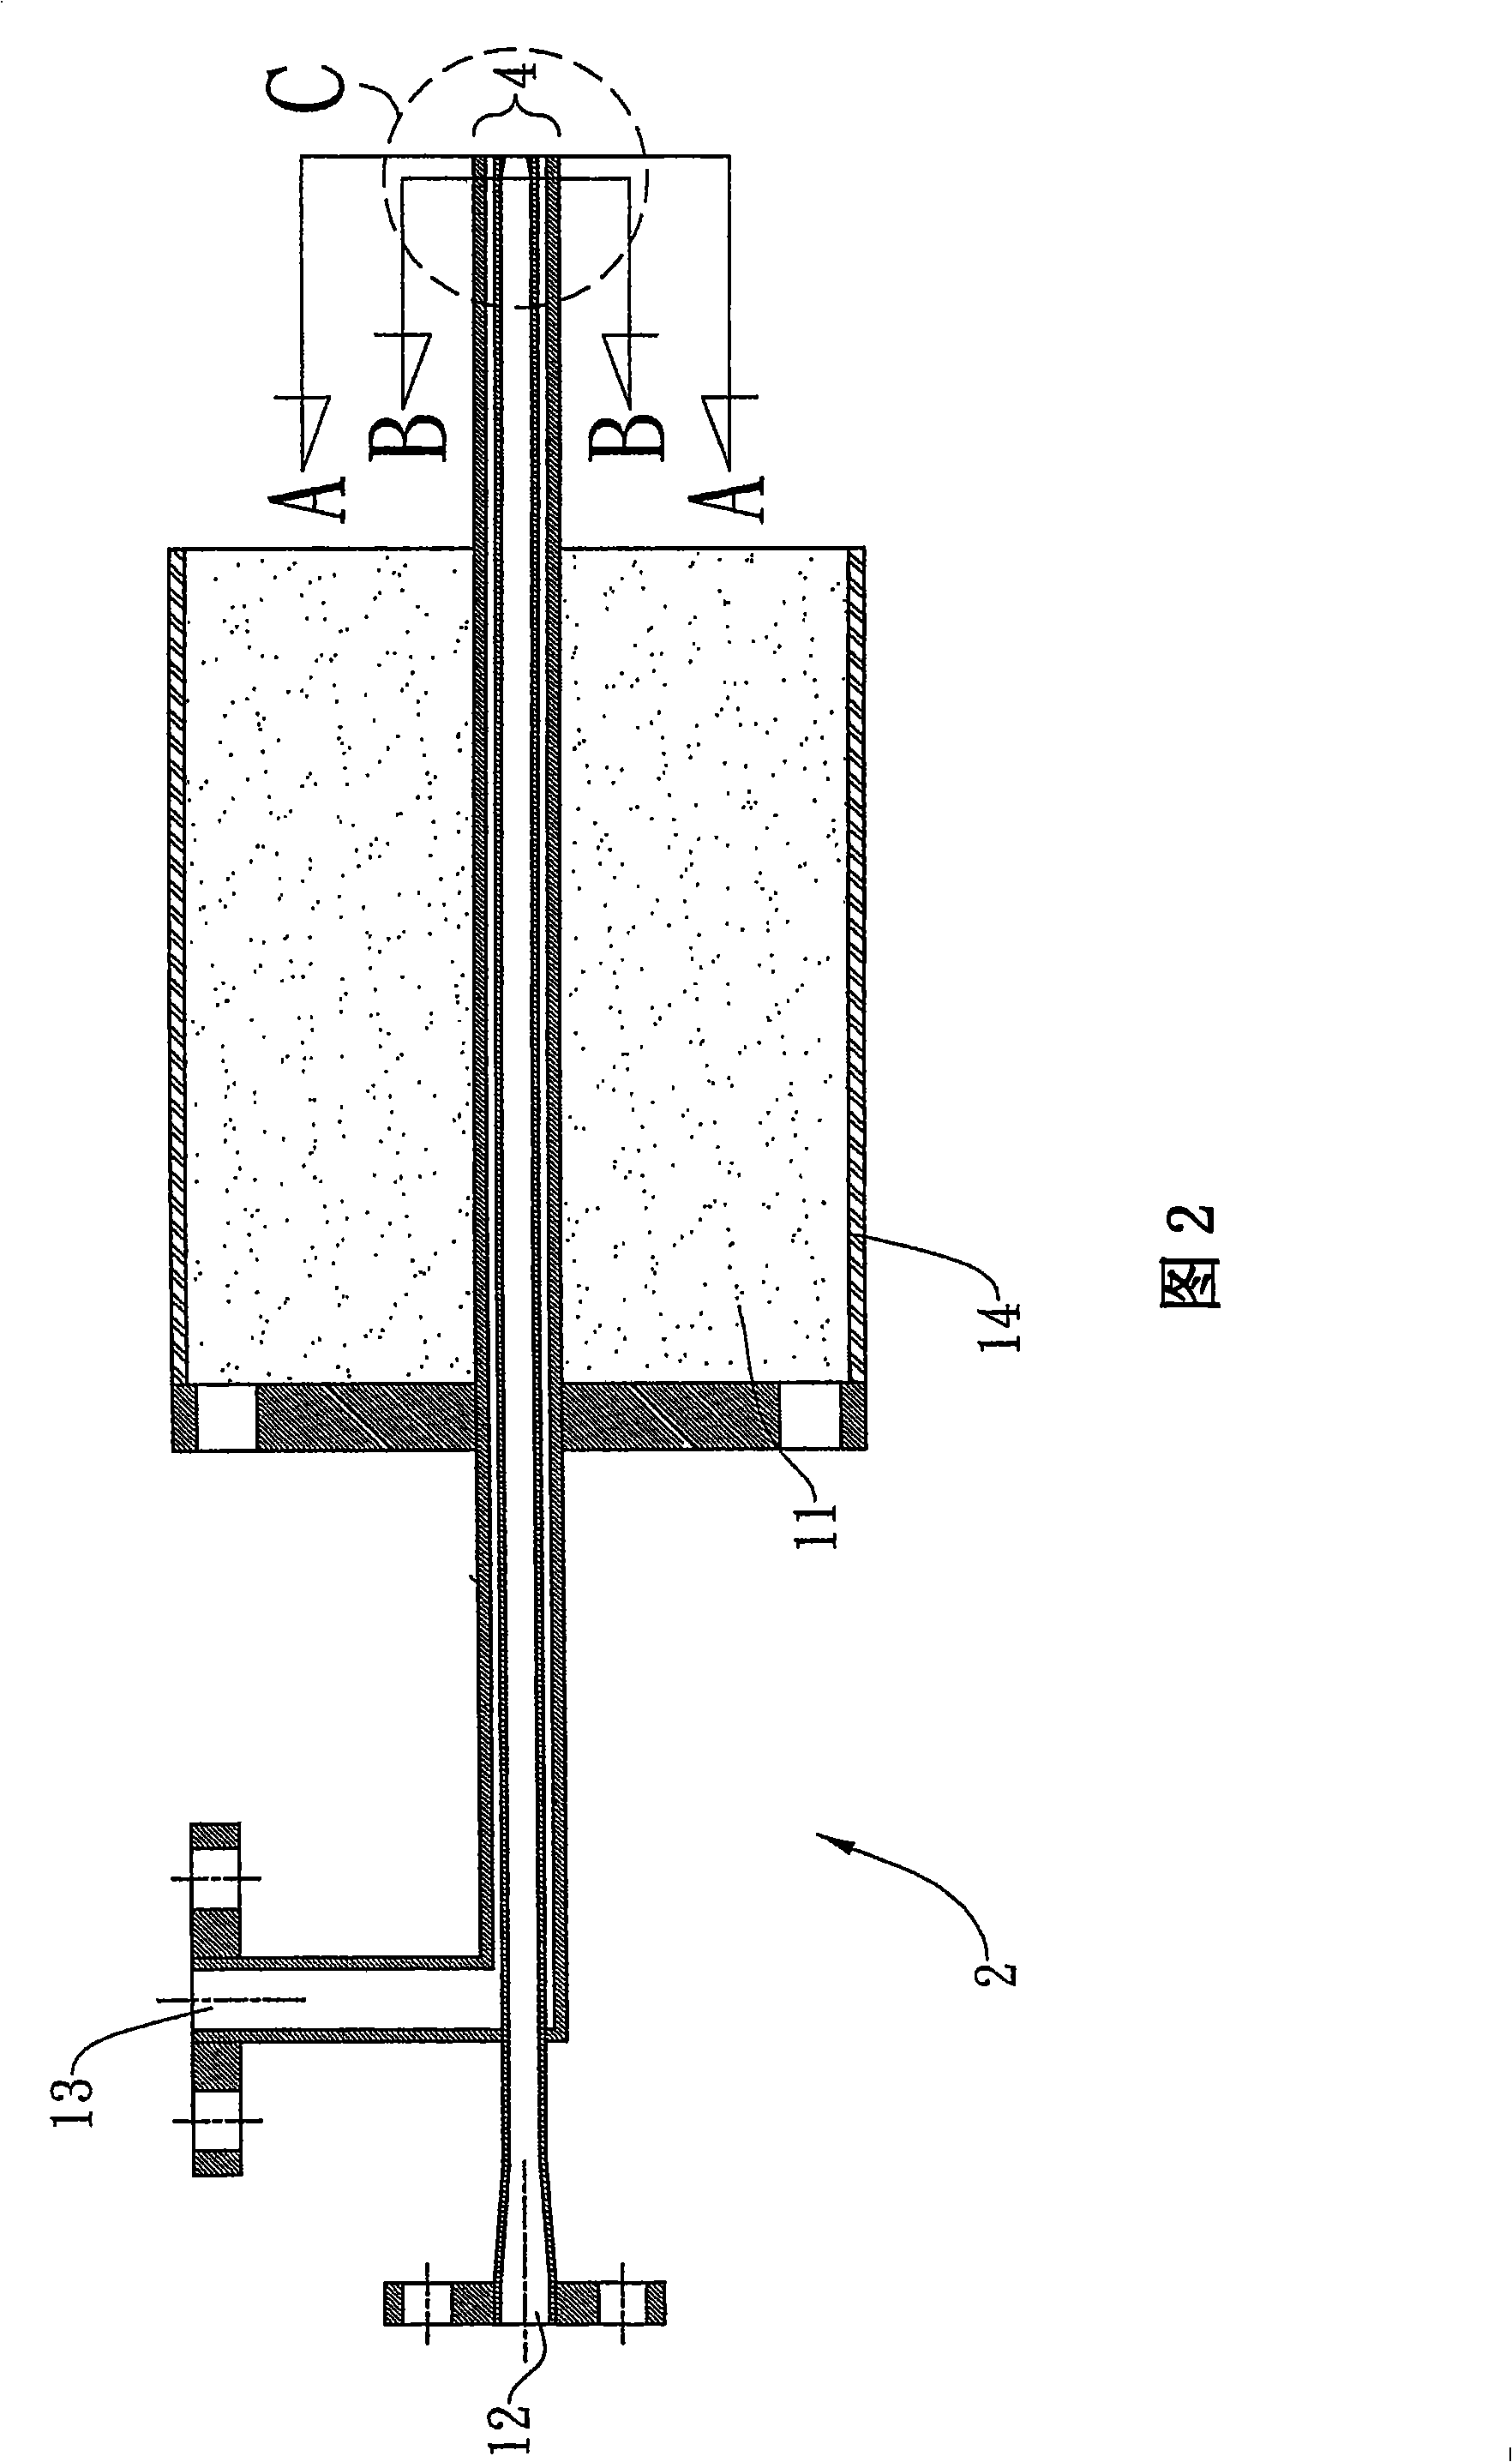 Gasification furnace and charge-in system